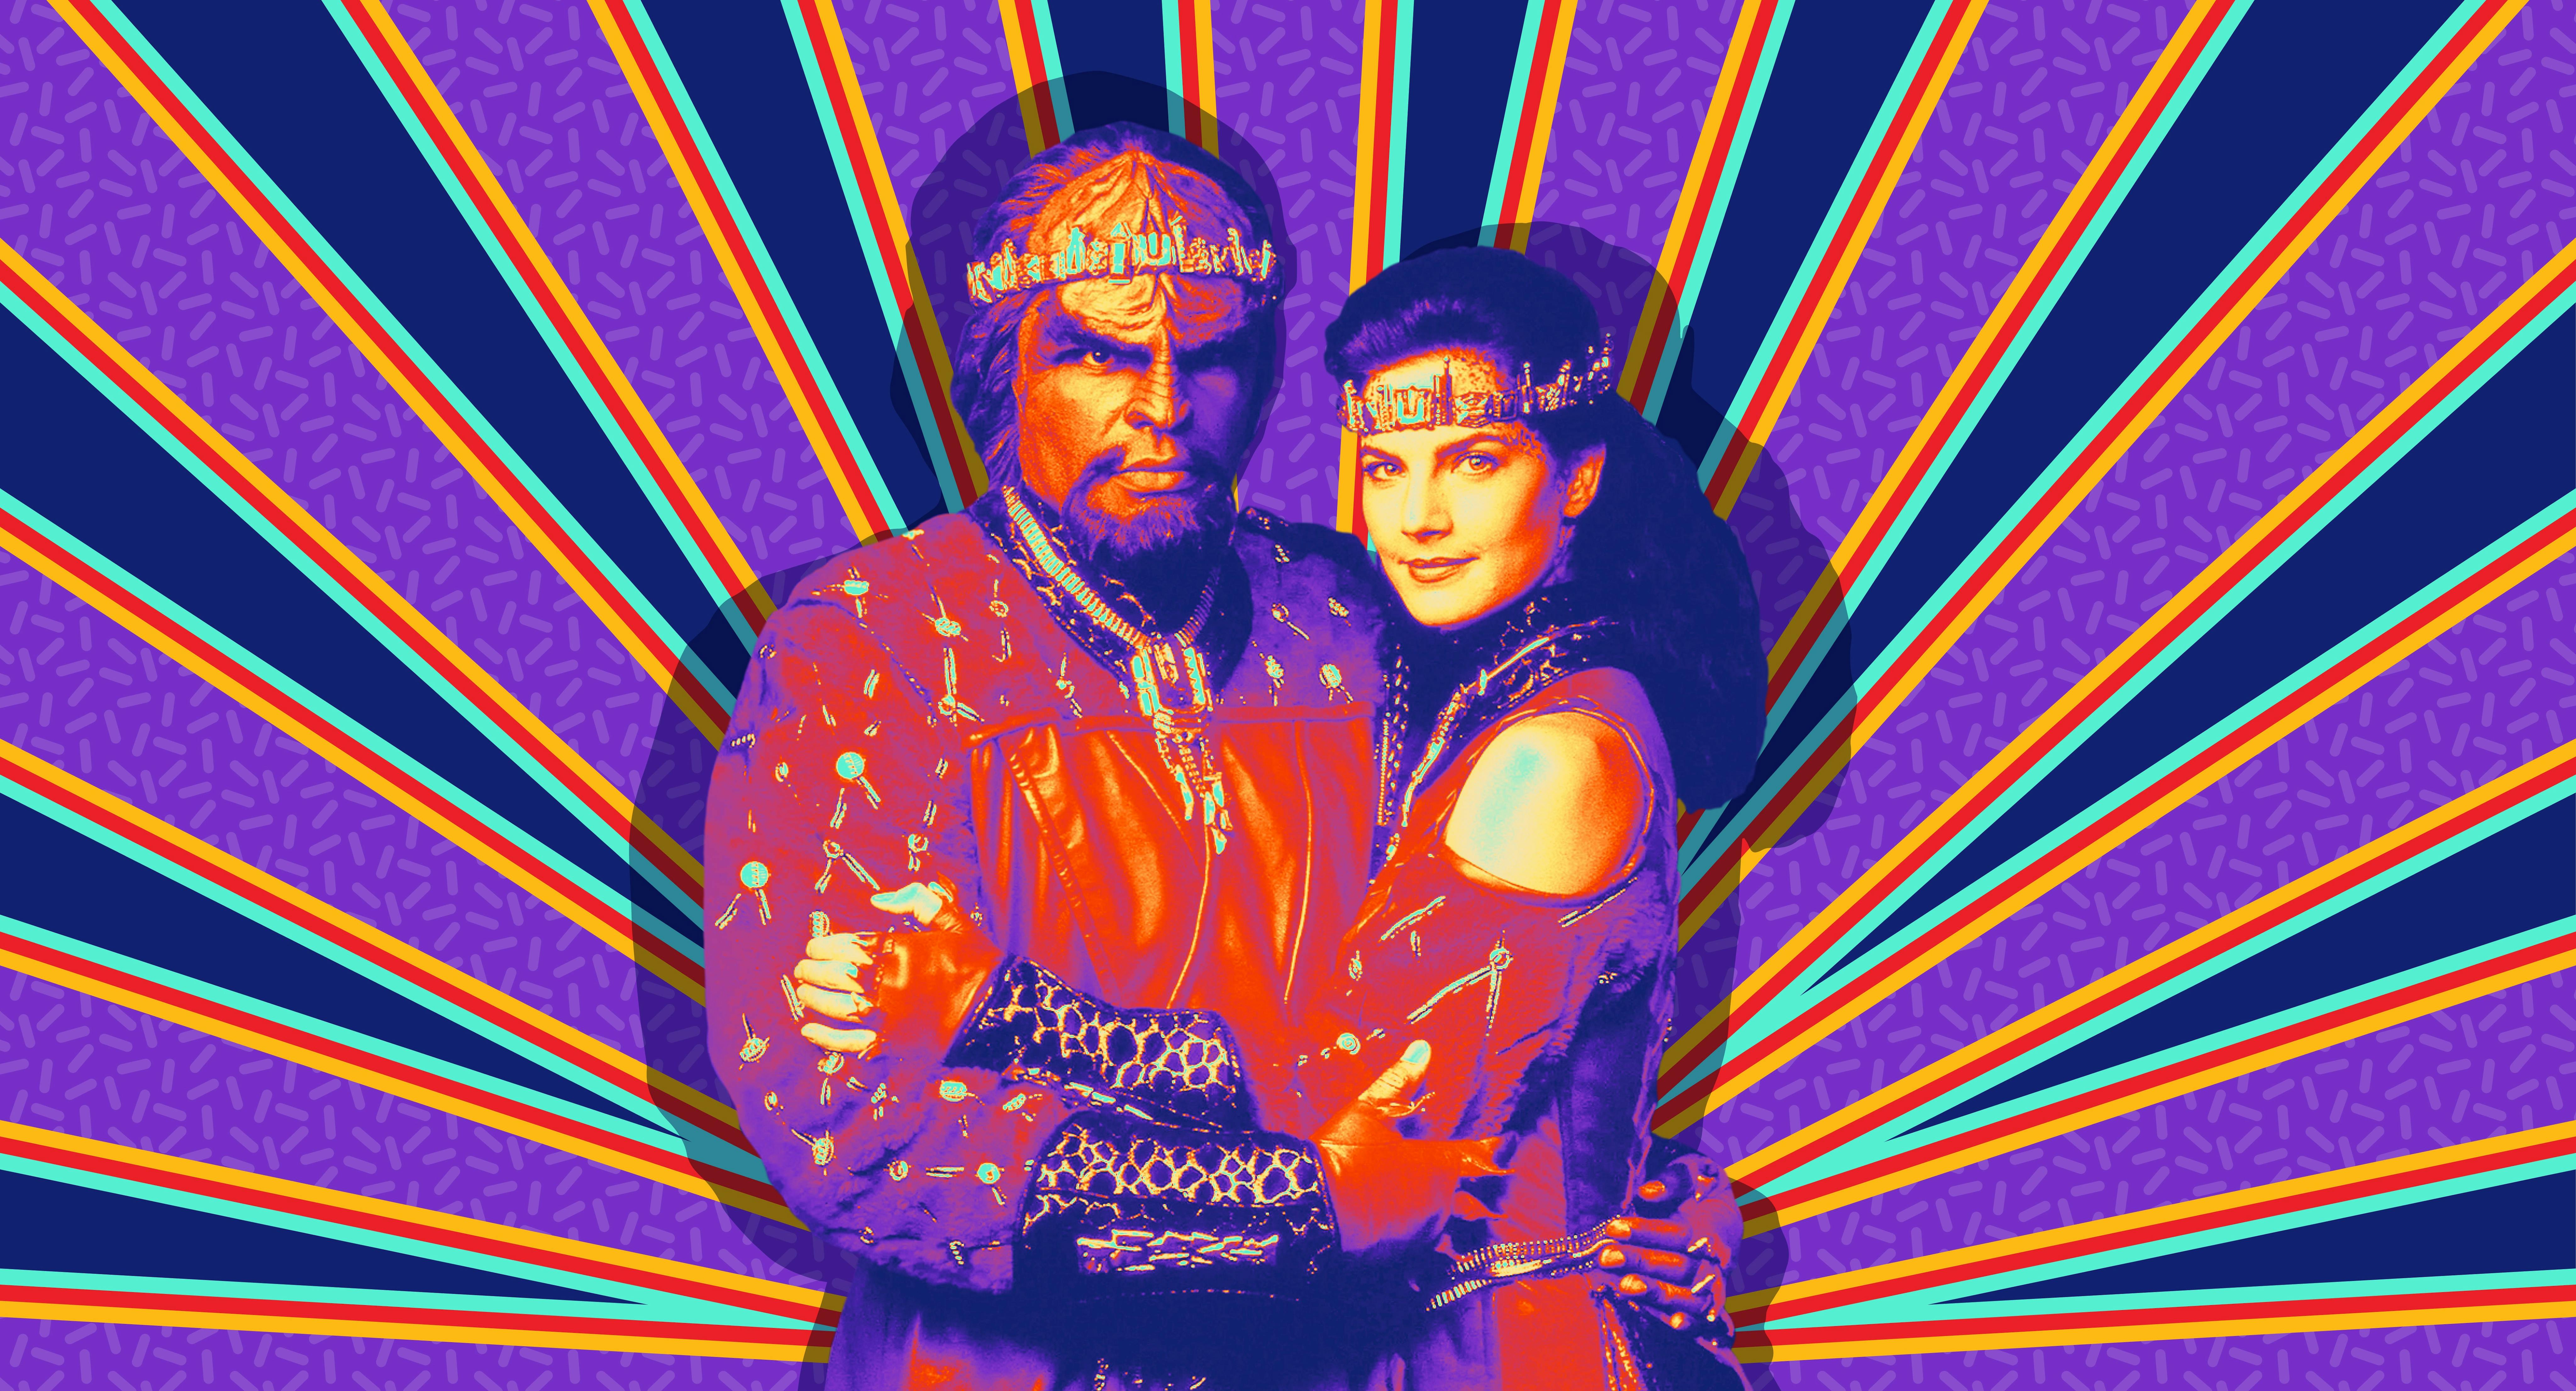 Illustrated banner of Worf and Jadzia Dax in their wedding outfits on Star Trek: Deep Space Nine